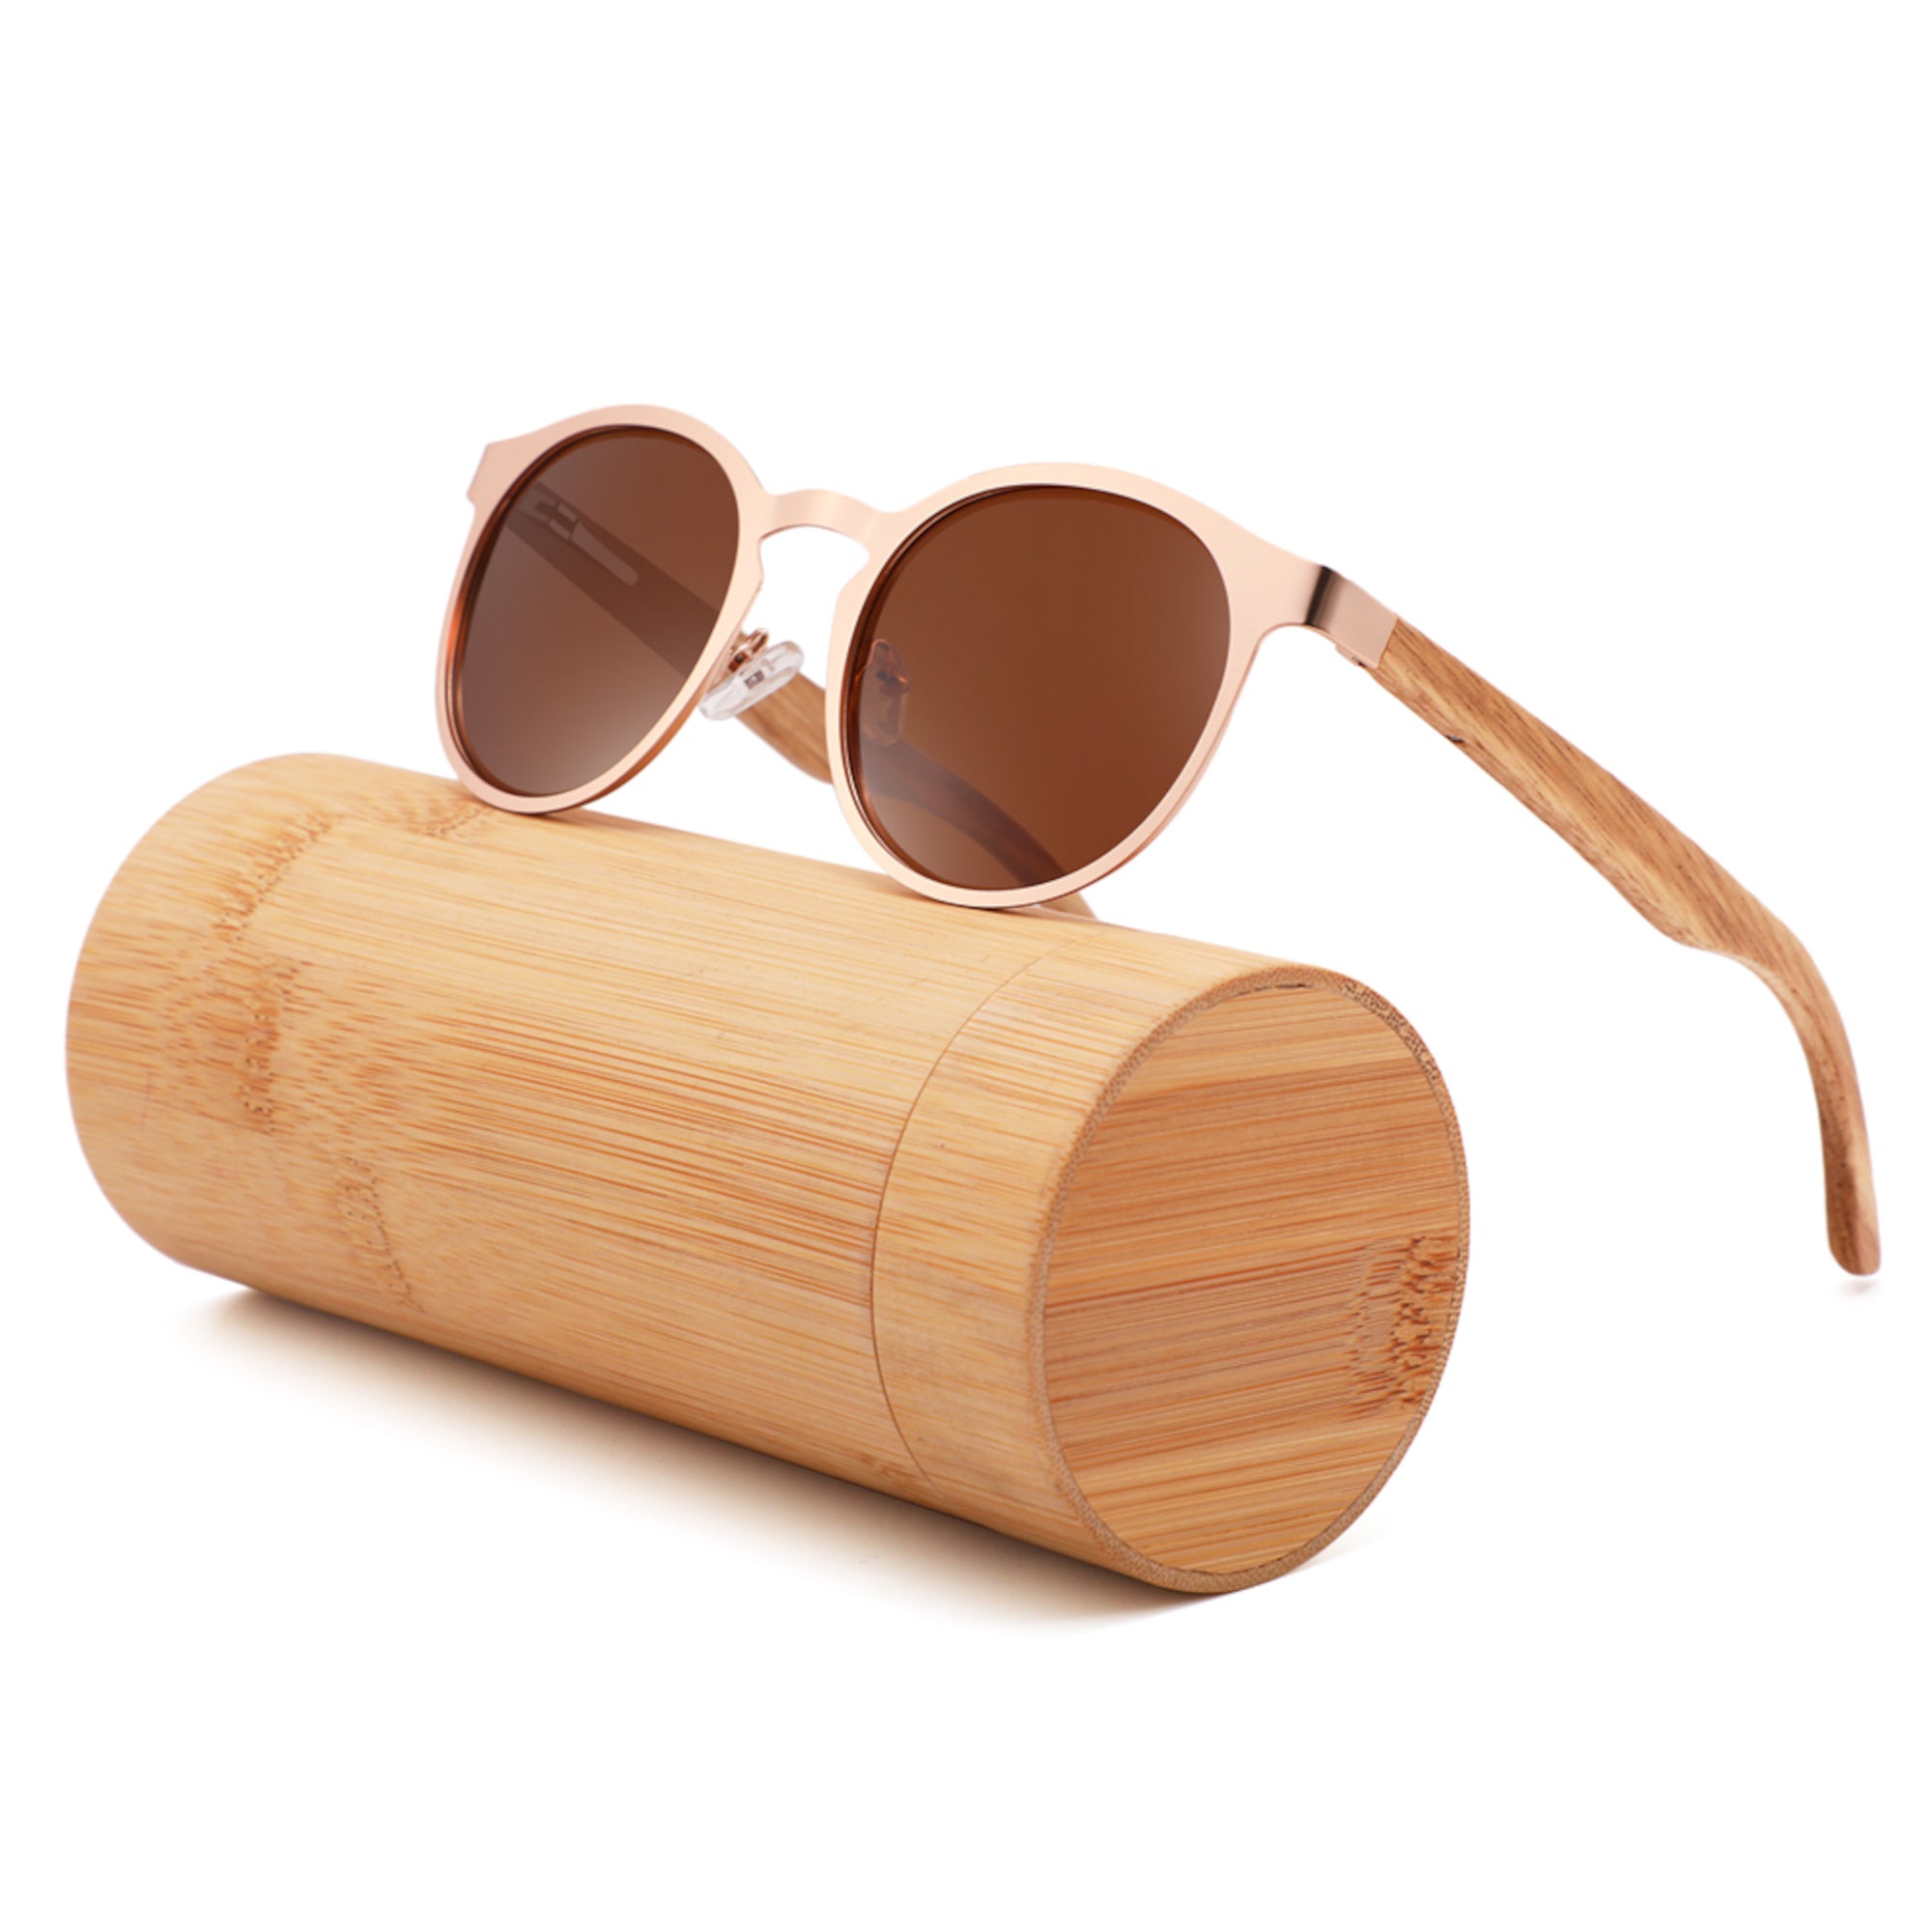 Hybrid Wooden Rounds - Real Wood & Polarized Lenses by WUDN